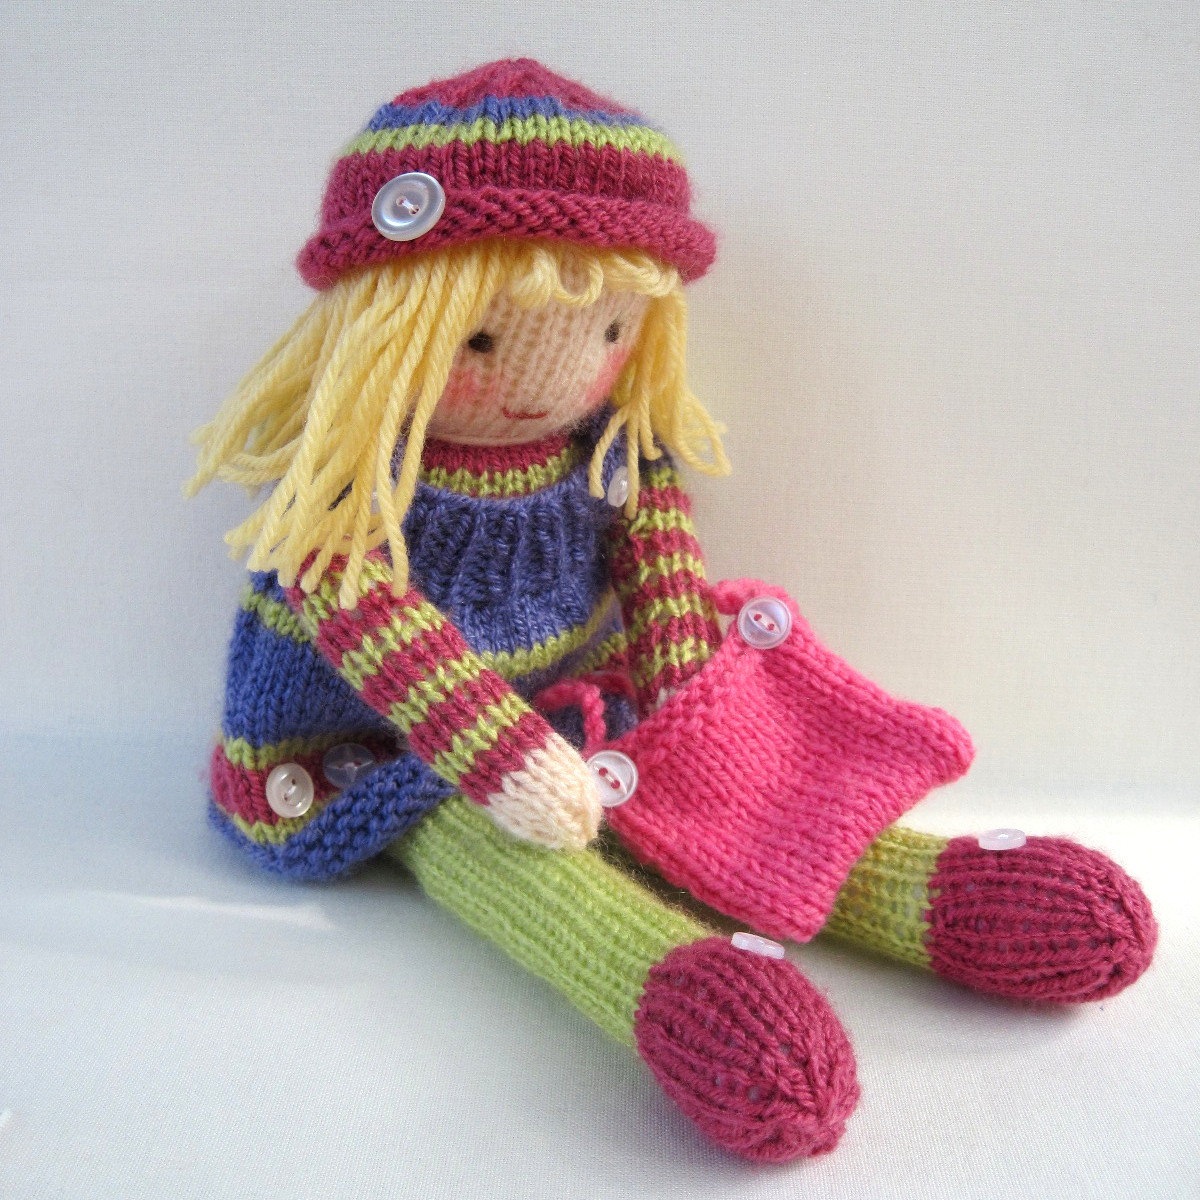 Betsy button knitted doll